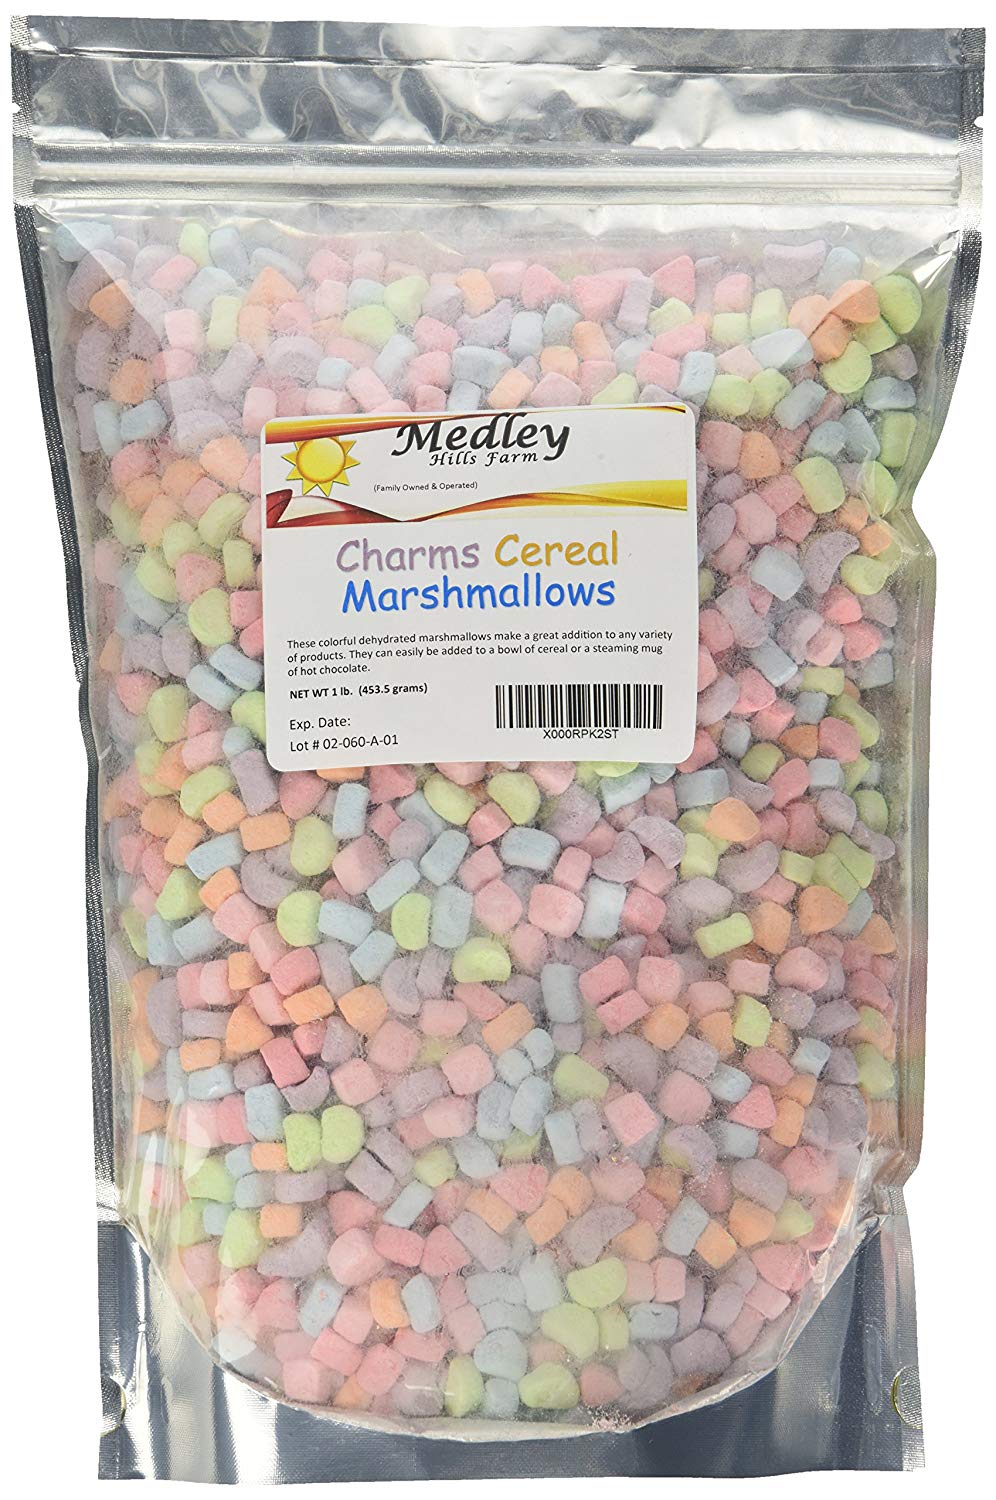 Charms Cereal Marshmallows